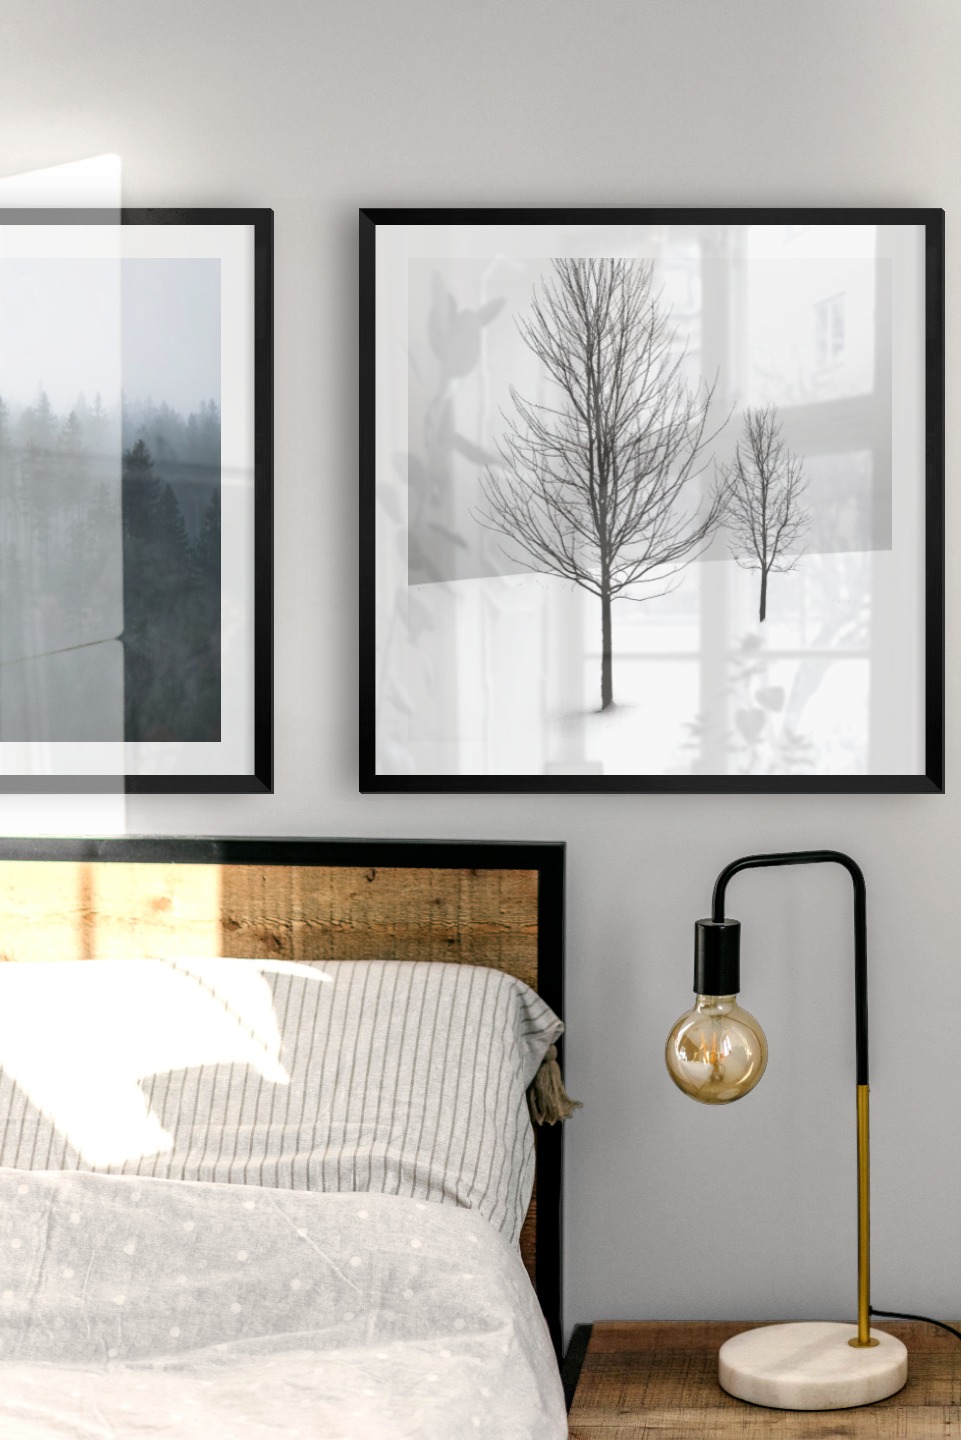 Gallery wall with picture frames in black in sizes 50x50 with prints "Foggy forest" and "Trees in the snow"